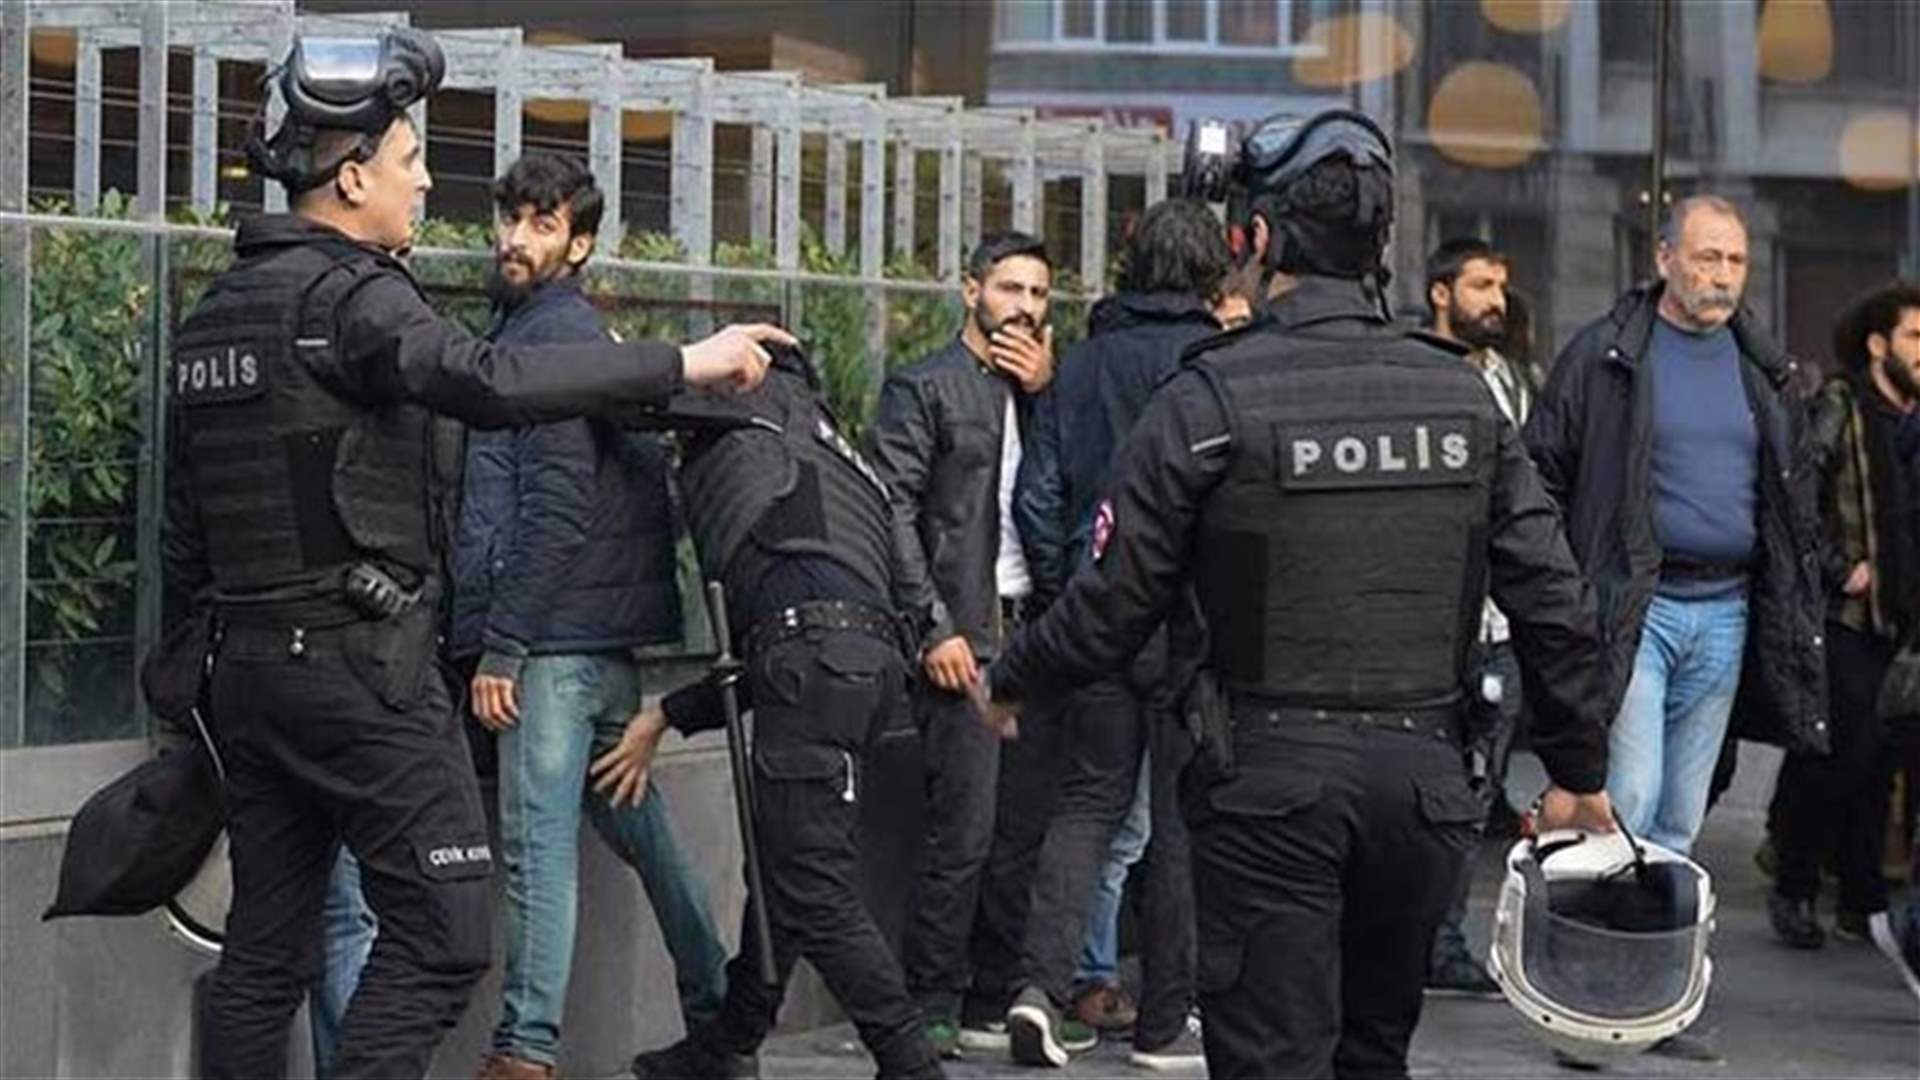 Turkey detains more than 2,000 people over militant, coup links - interior ministry